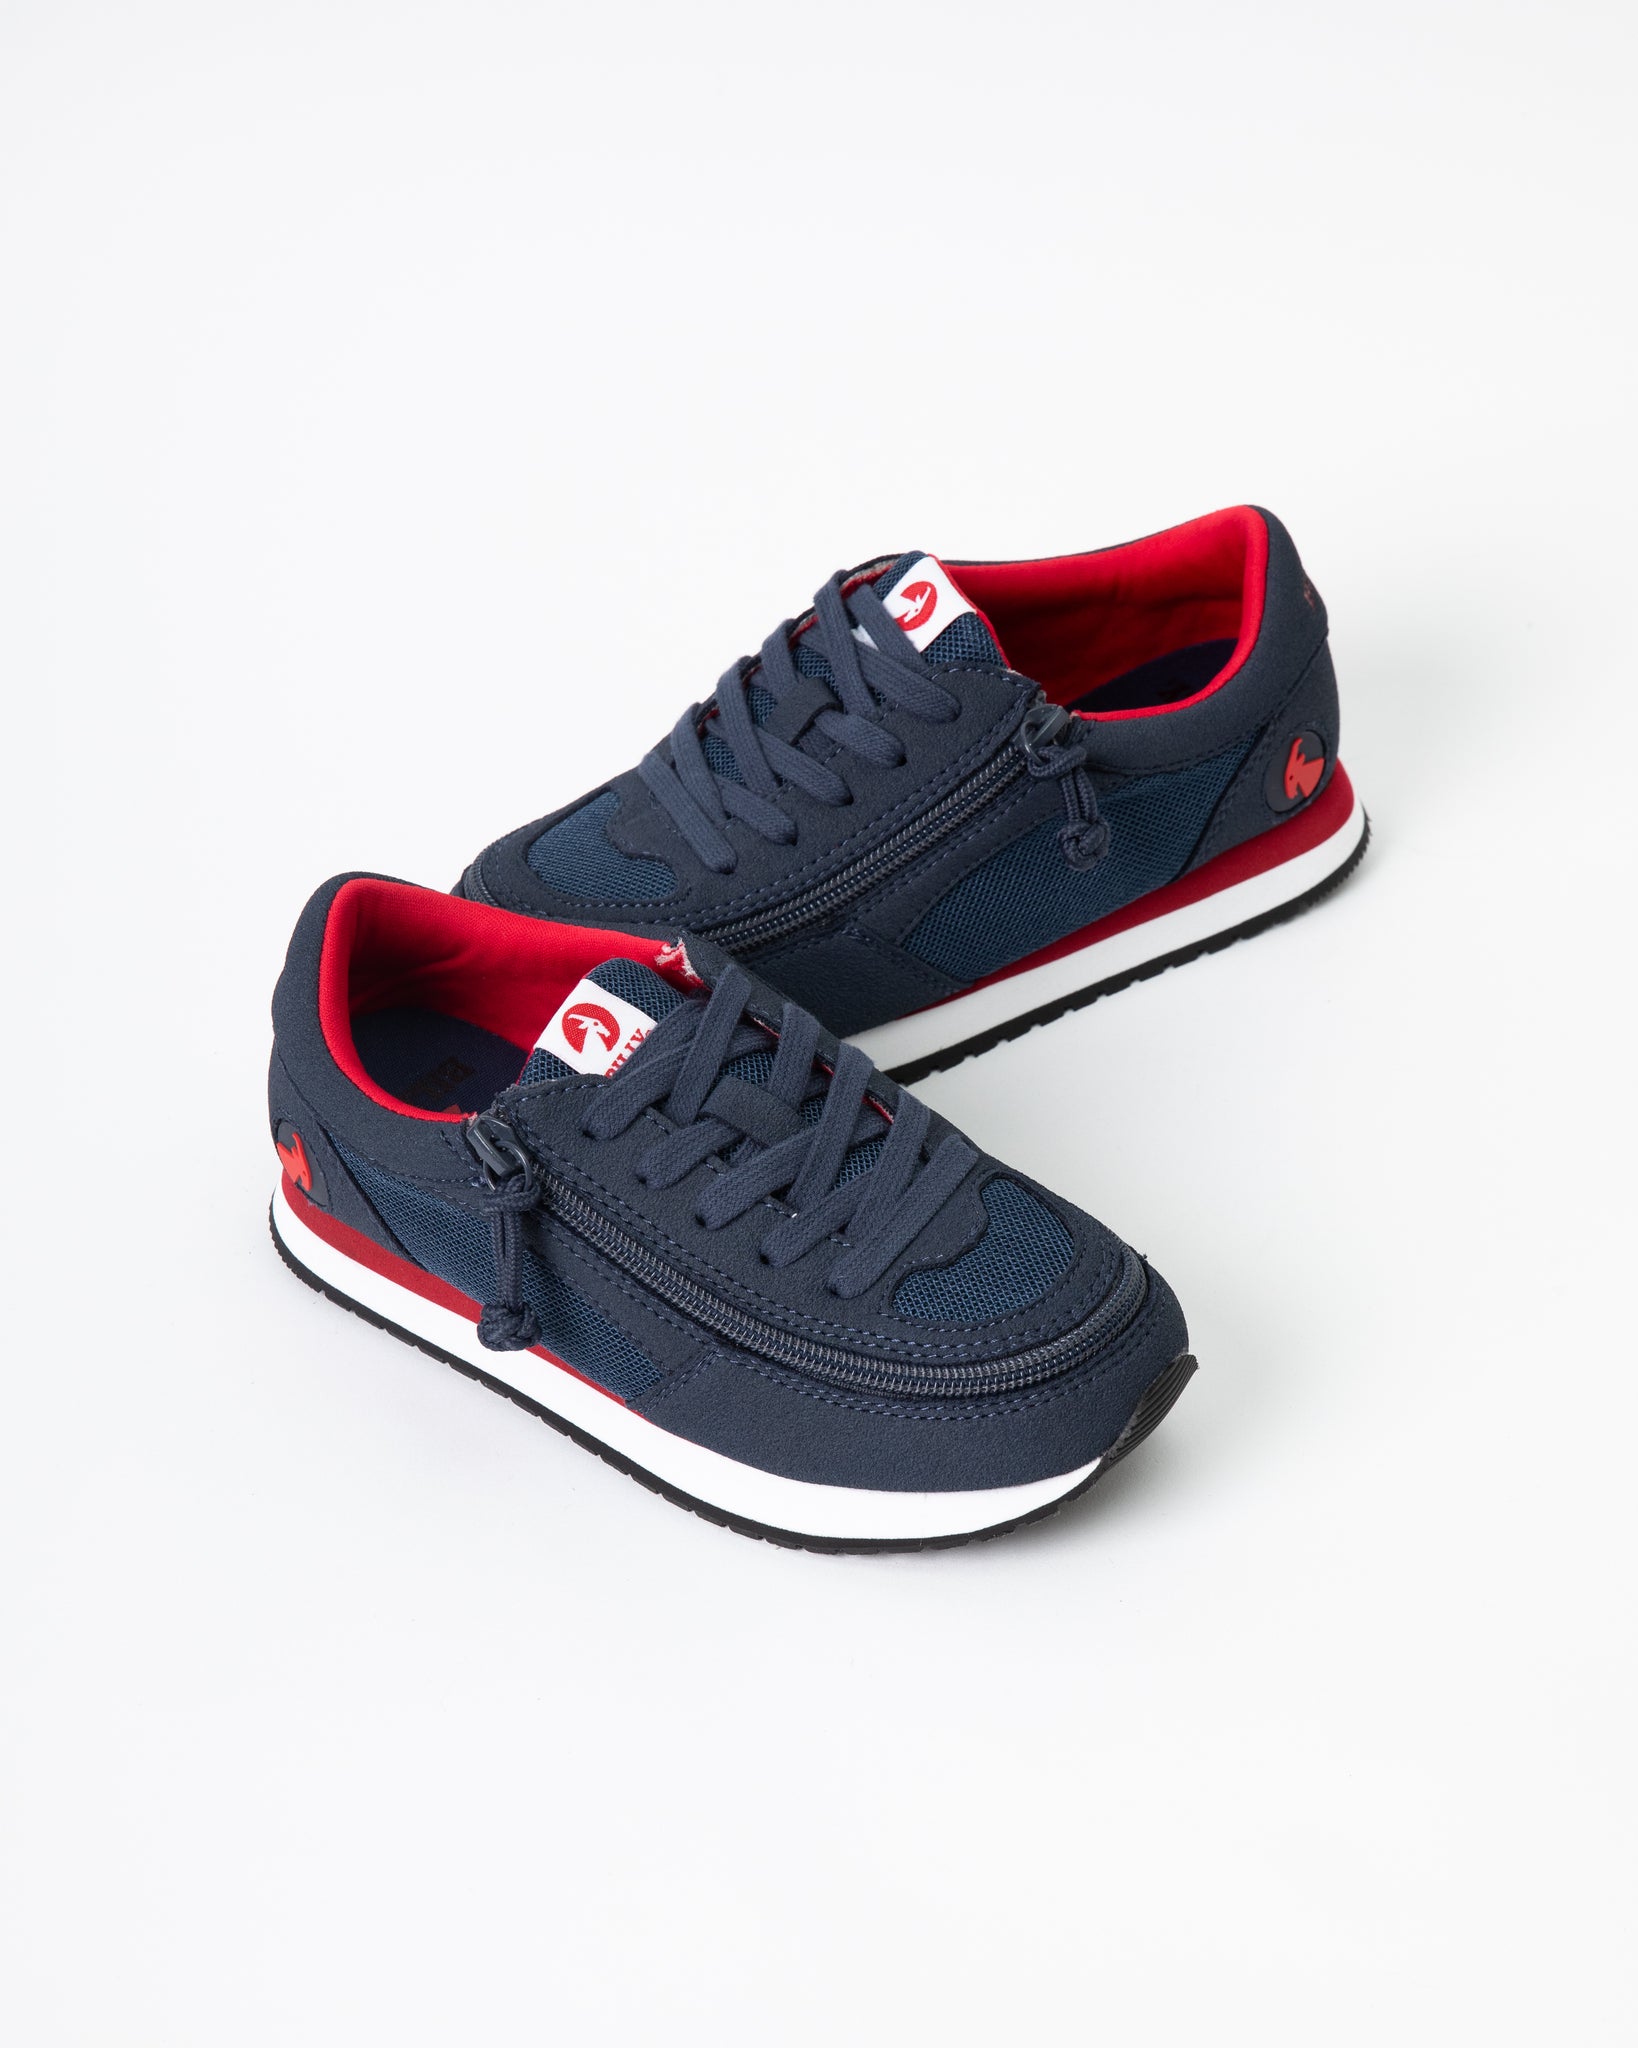 Jogger (Kids) - Navy/ Red